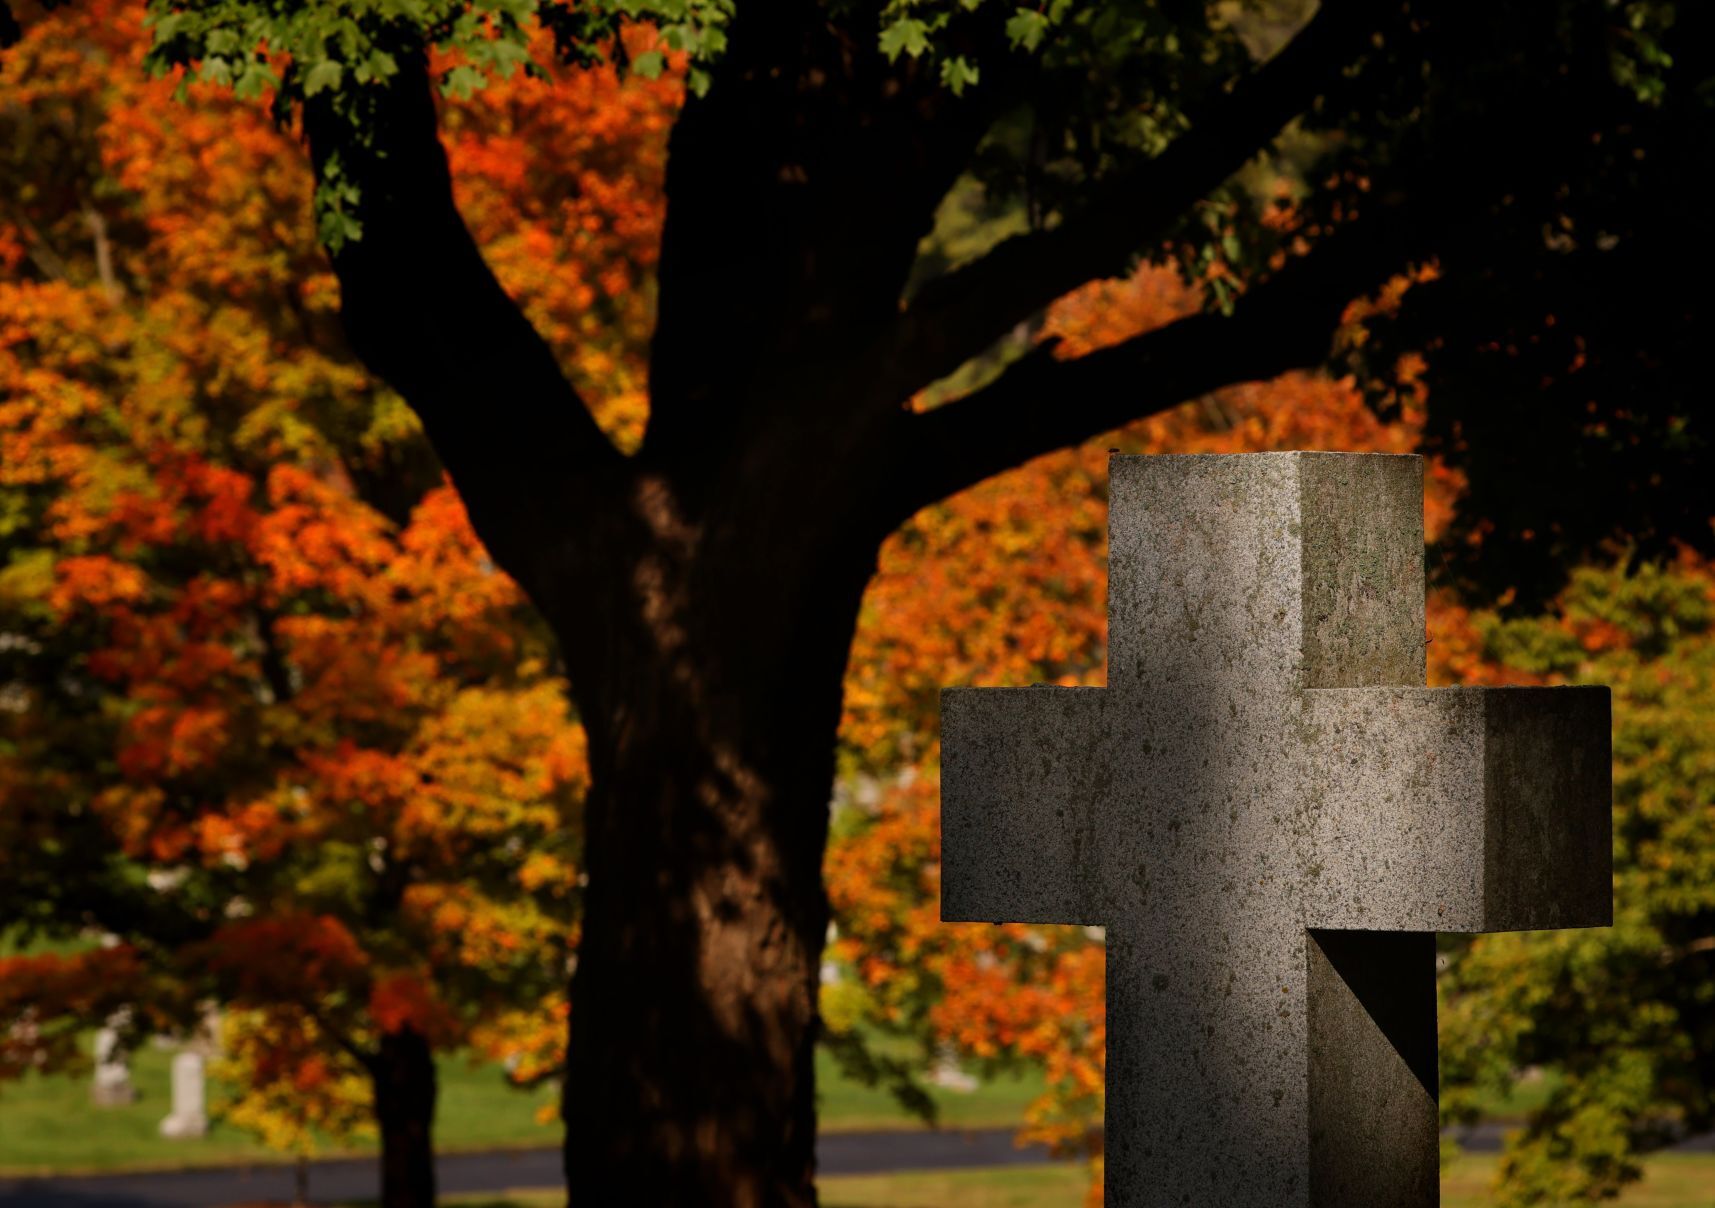 The grave marker of Matthew and Catherine King, who died in 1932 and 1947 respectively, catches broken light on Wednesday, 27 October 2021, against turning leaves at Calvary Cemetery in St. Louis, signaling the Autumn season. Photo: Christian Gooden / St. Louis Post-Dispatch